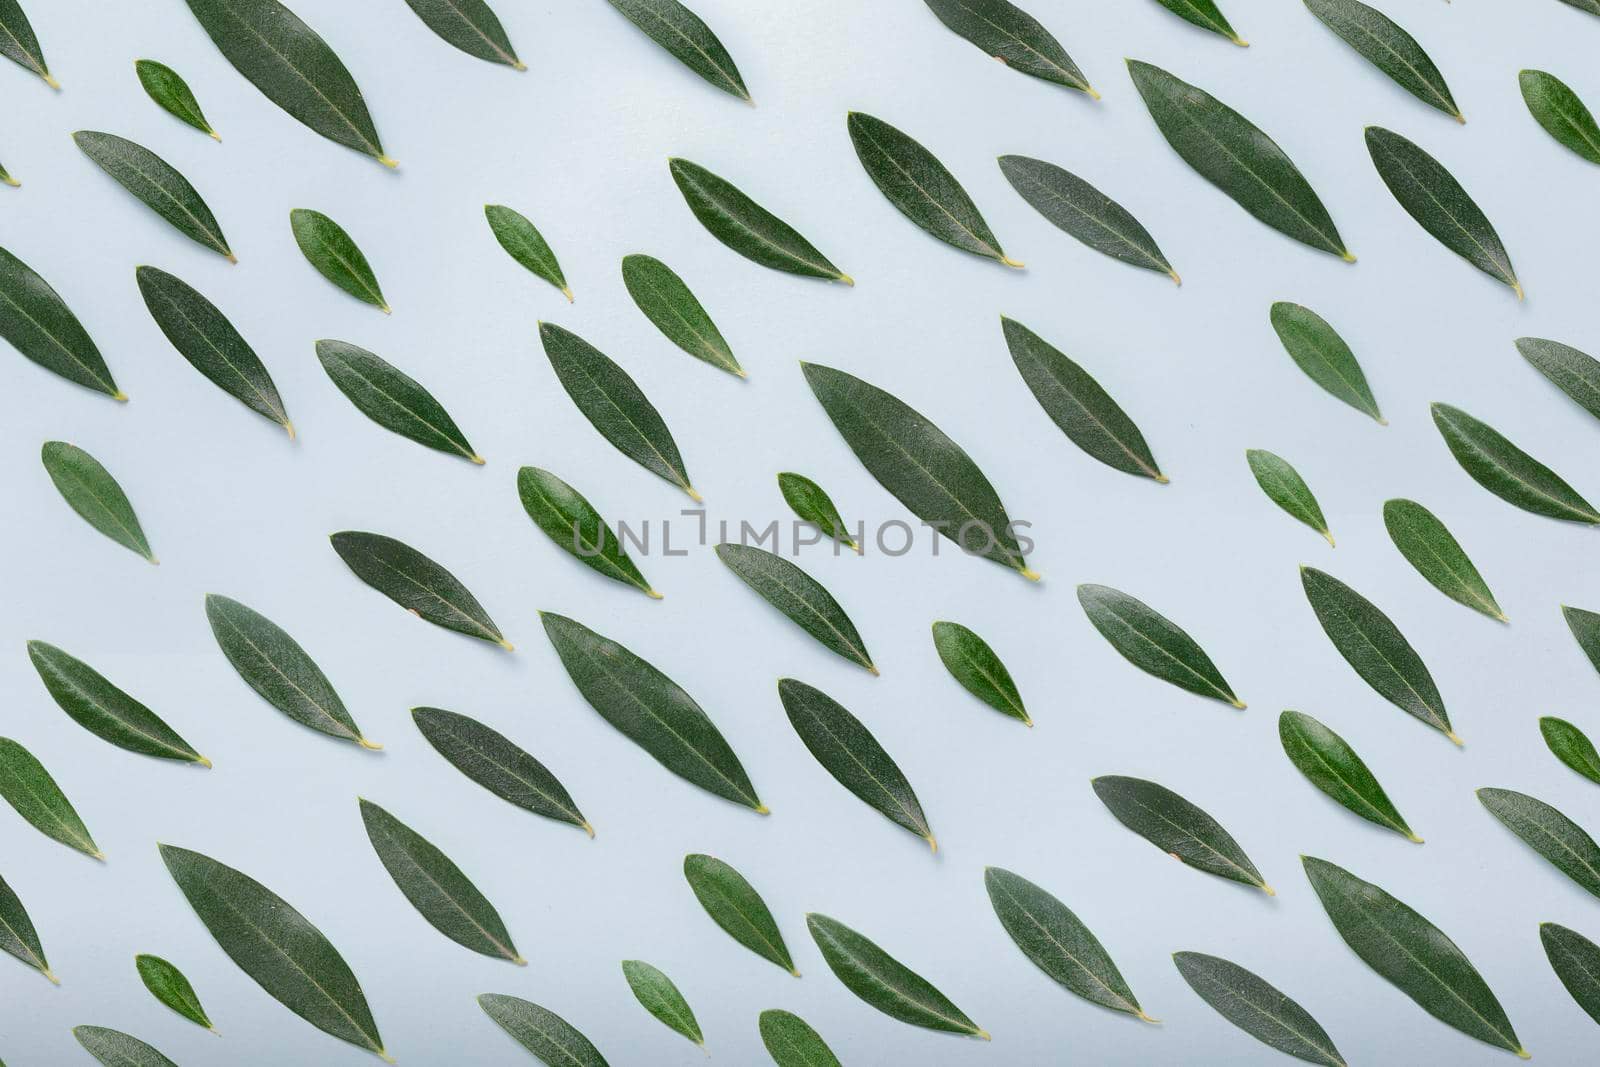 Cute and pretty background texture formed by olive leaves of different sizes, forming a repetitive but irregular pattern, on a soft blue background